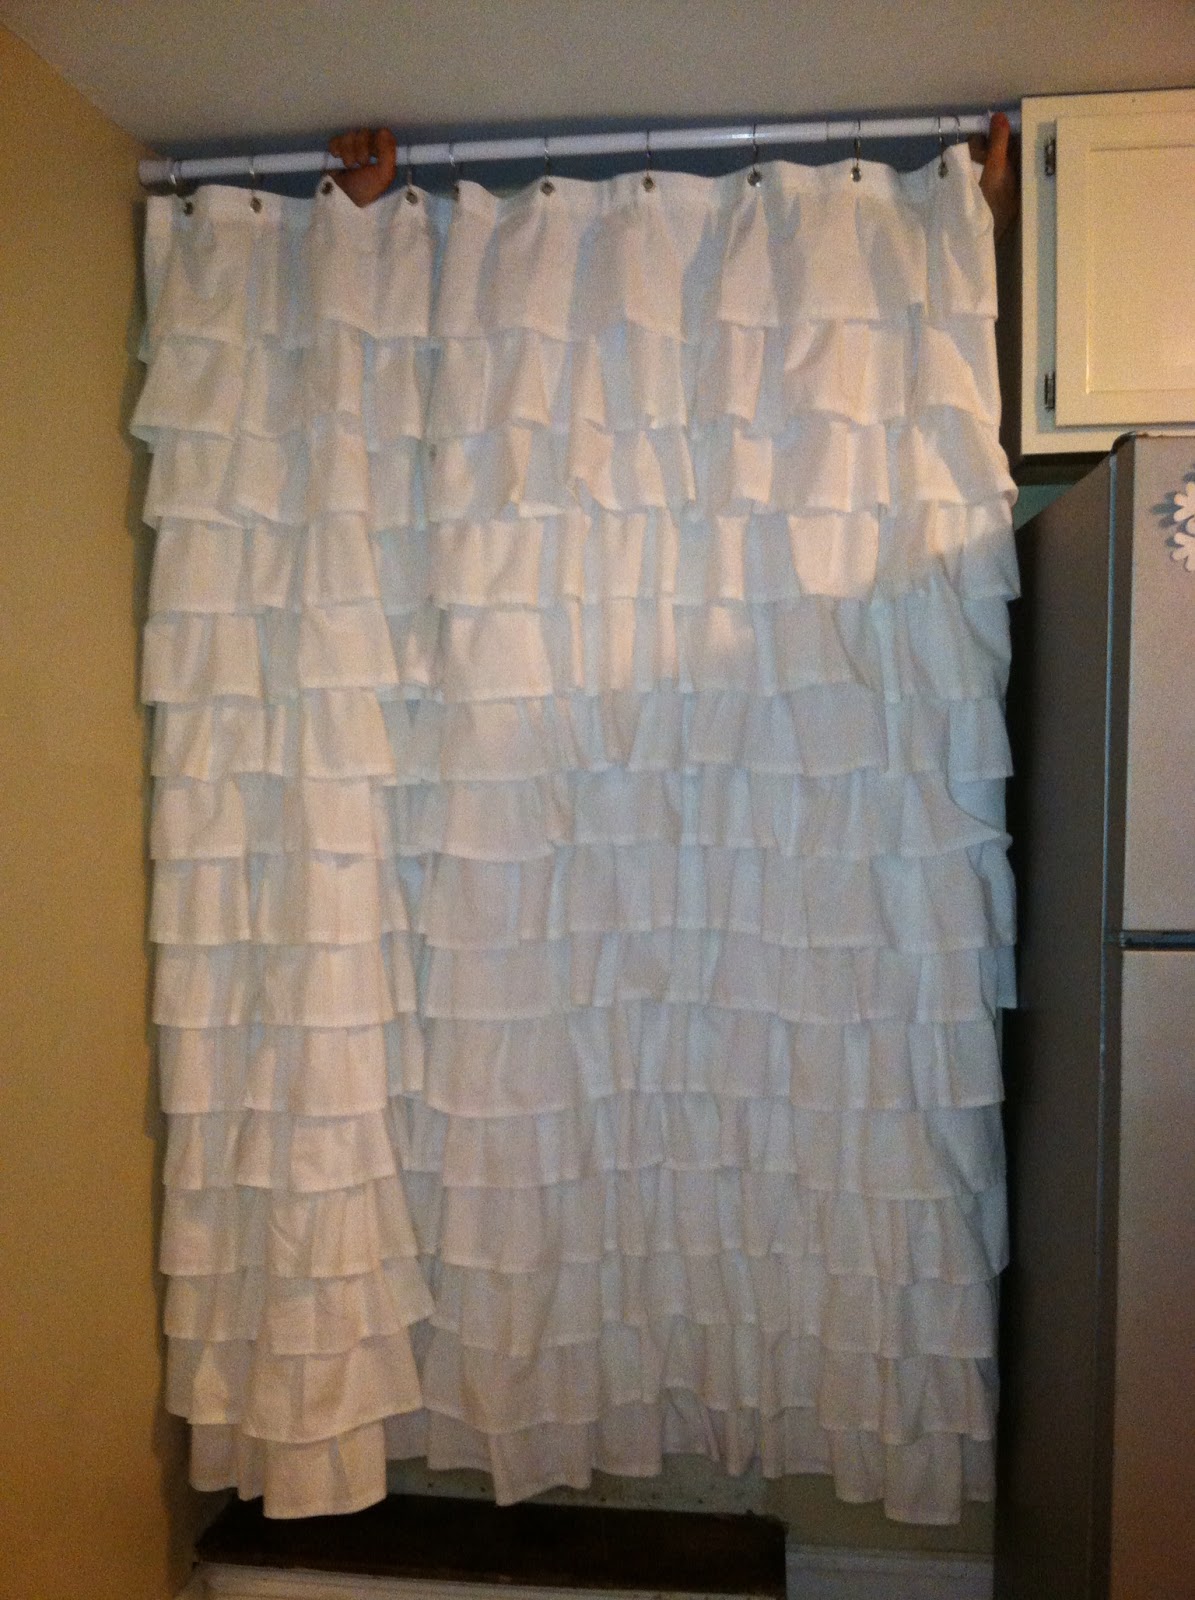 bathroom shower renovations How to make a ruffled shower curtain